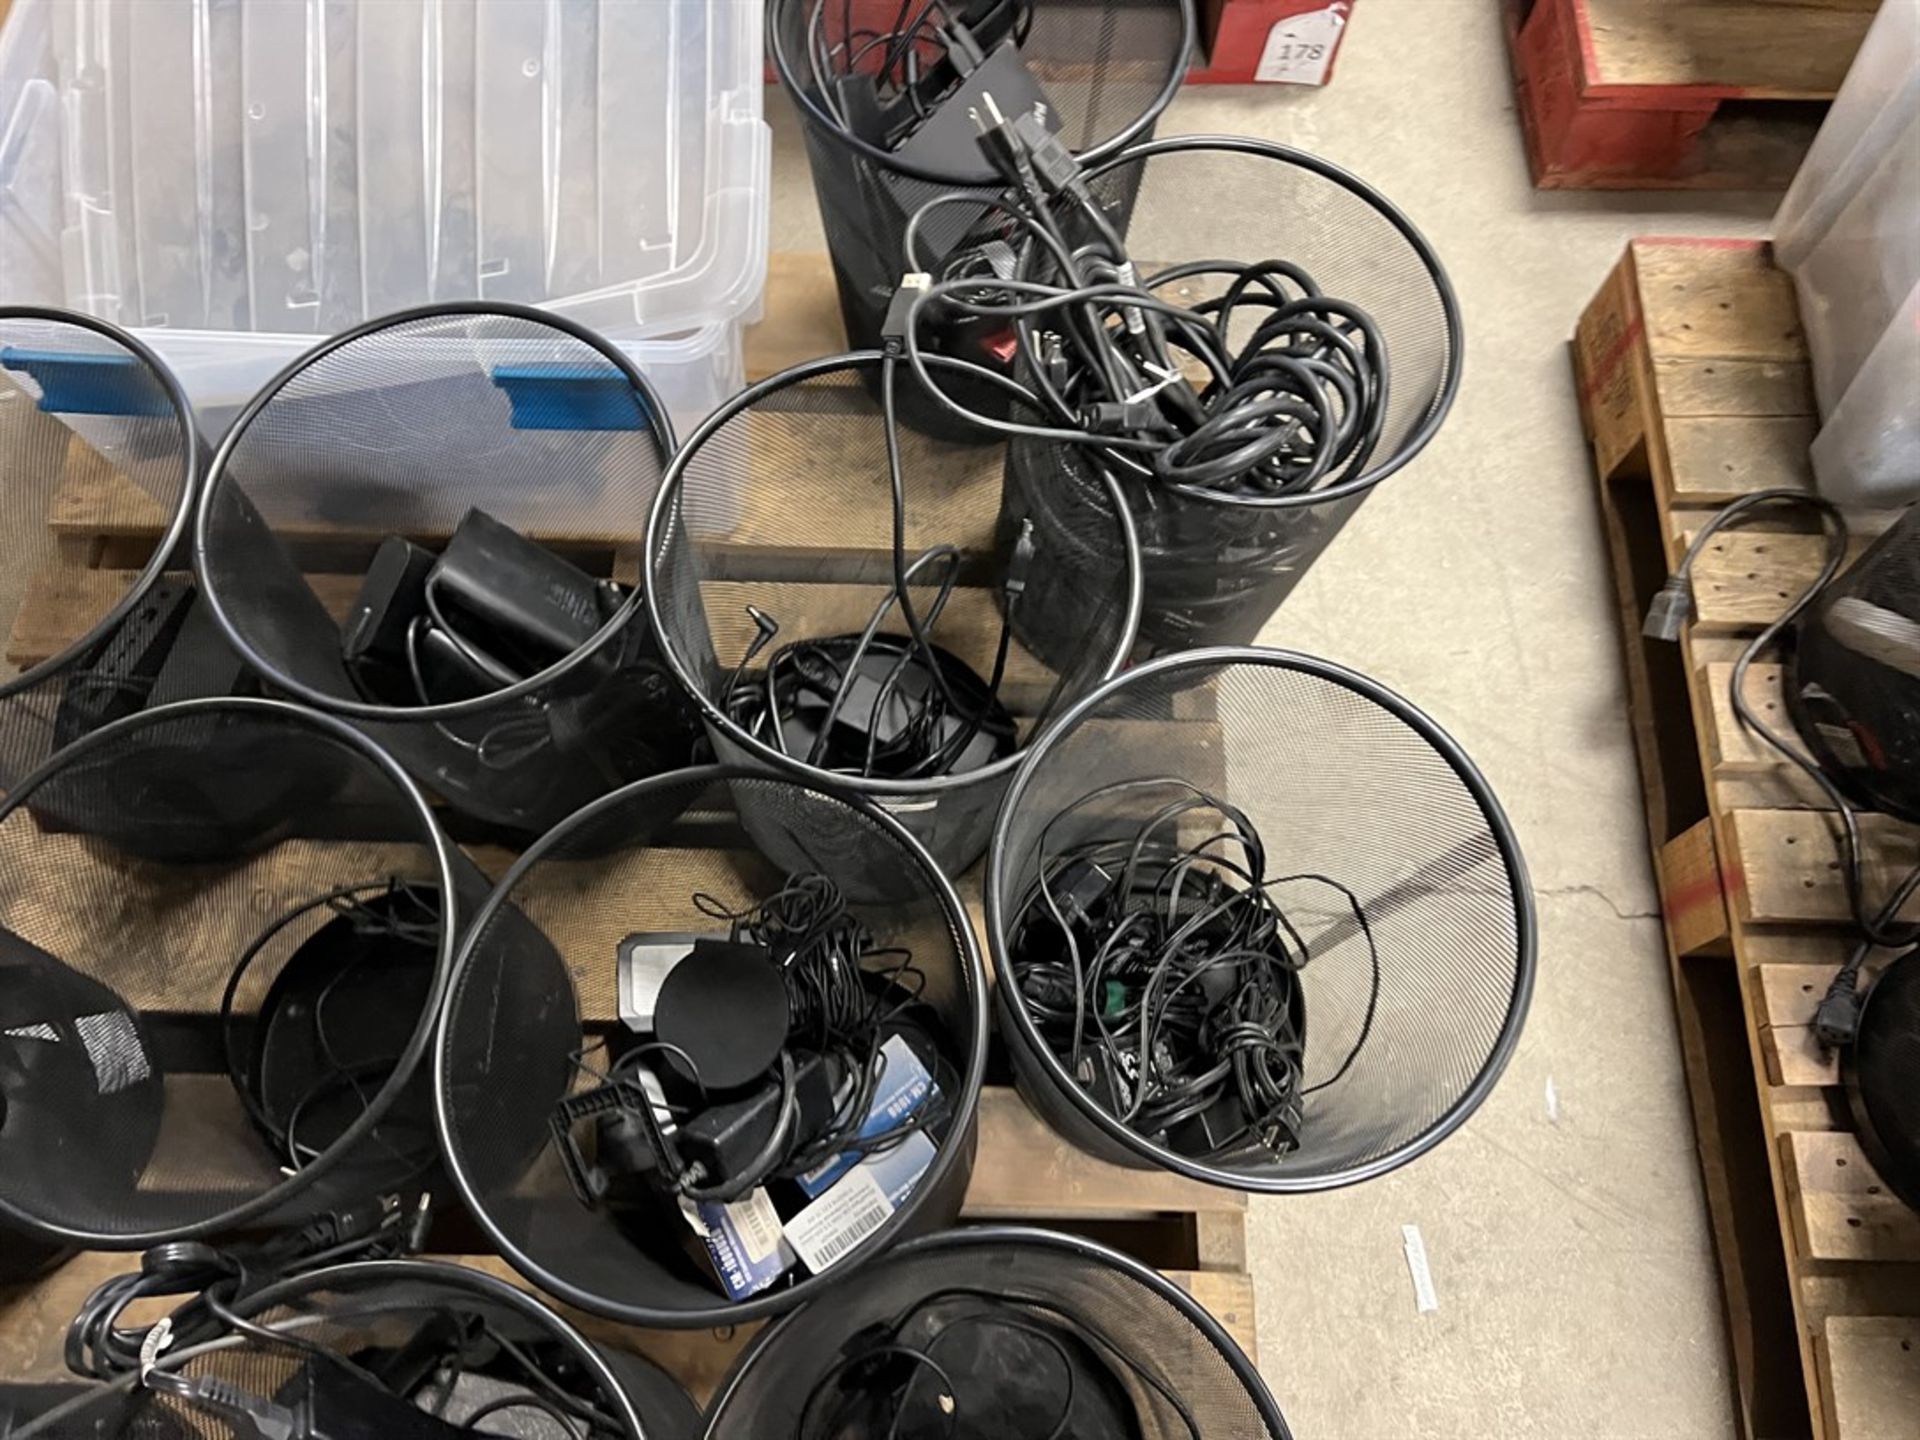 Lot of Assorted Laptop and Monitor Power Cords - Image 6 of 7